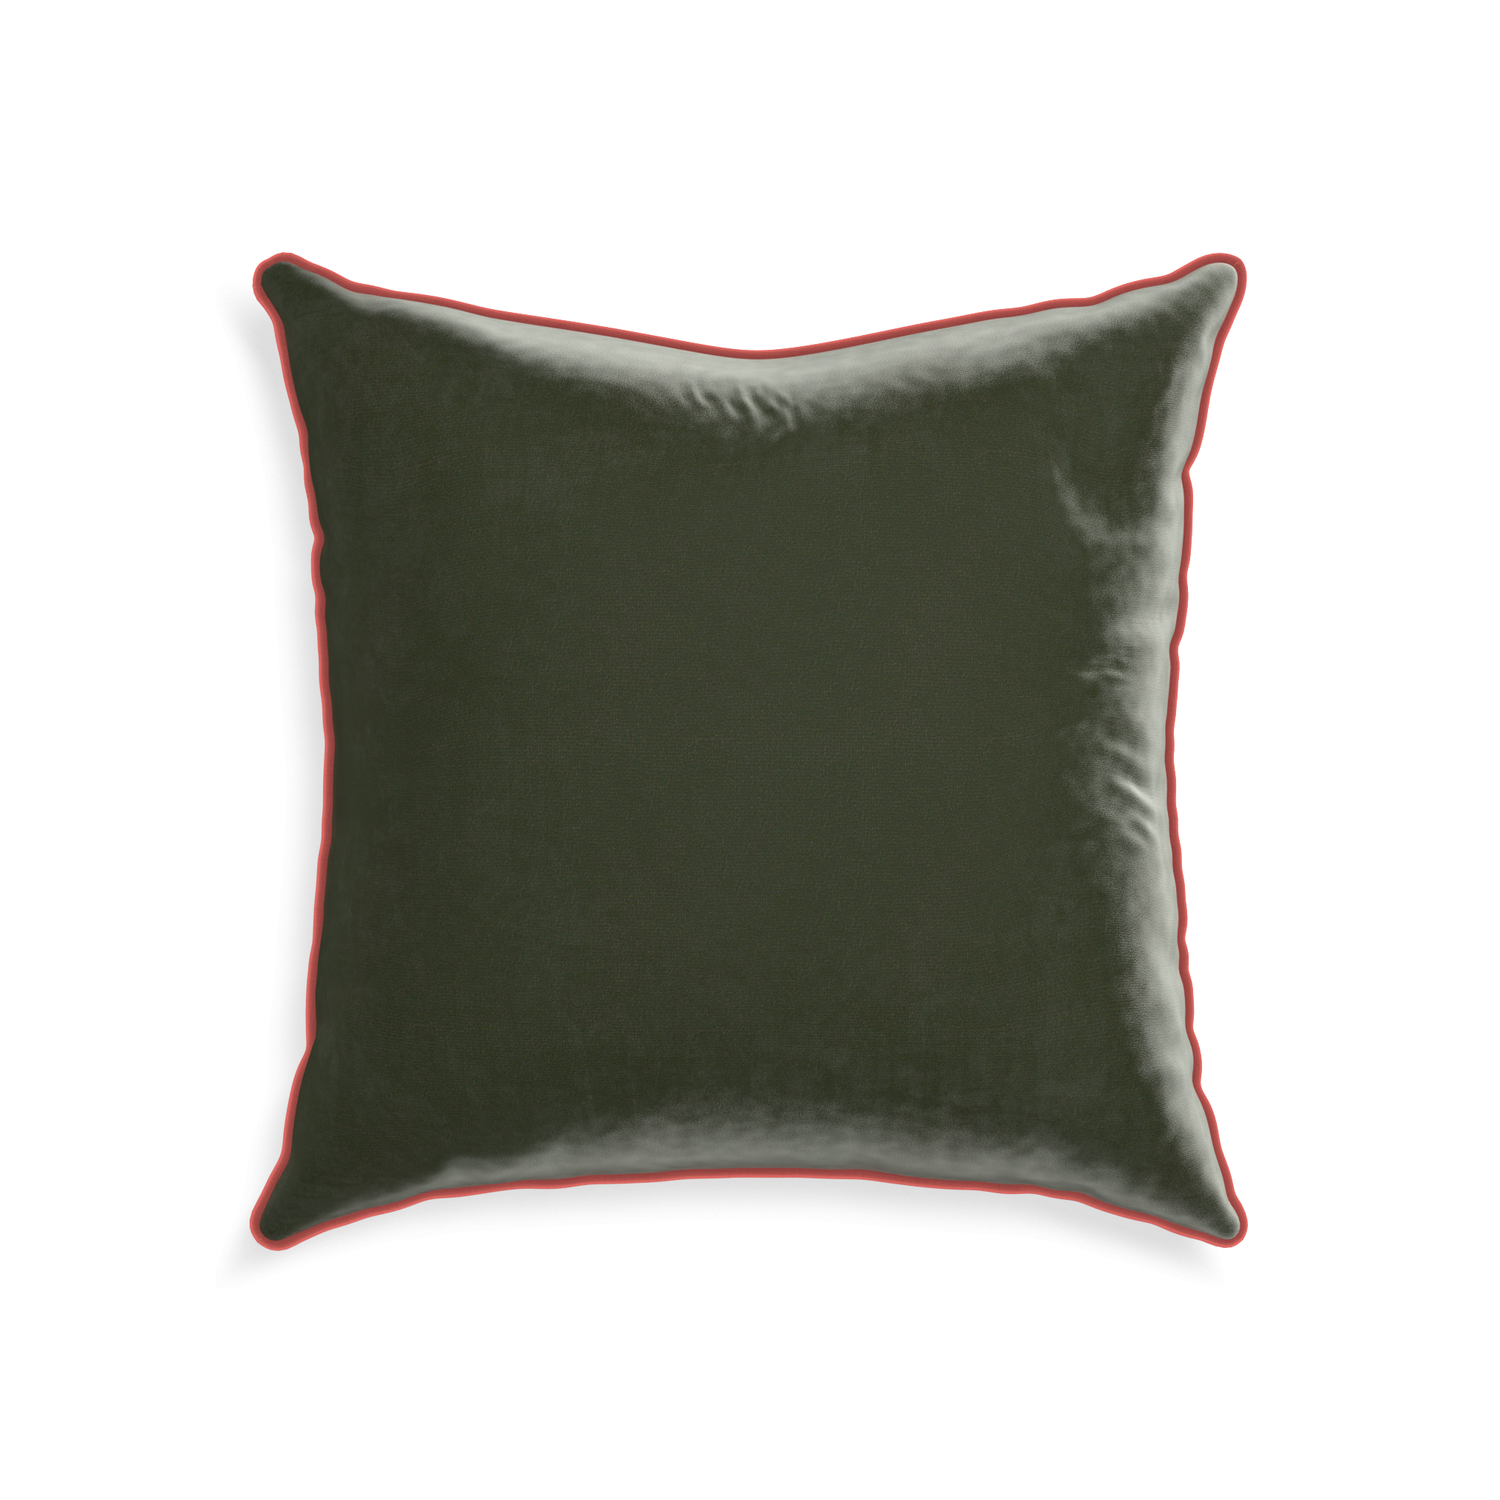 square fern green velvet pillow with coral piping